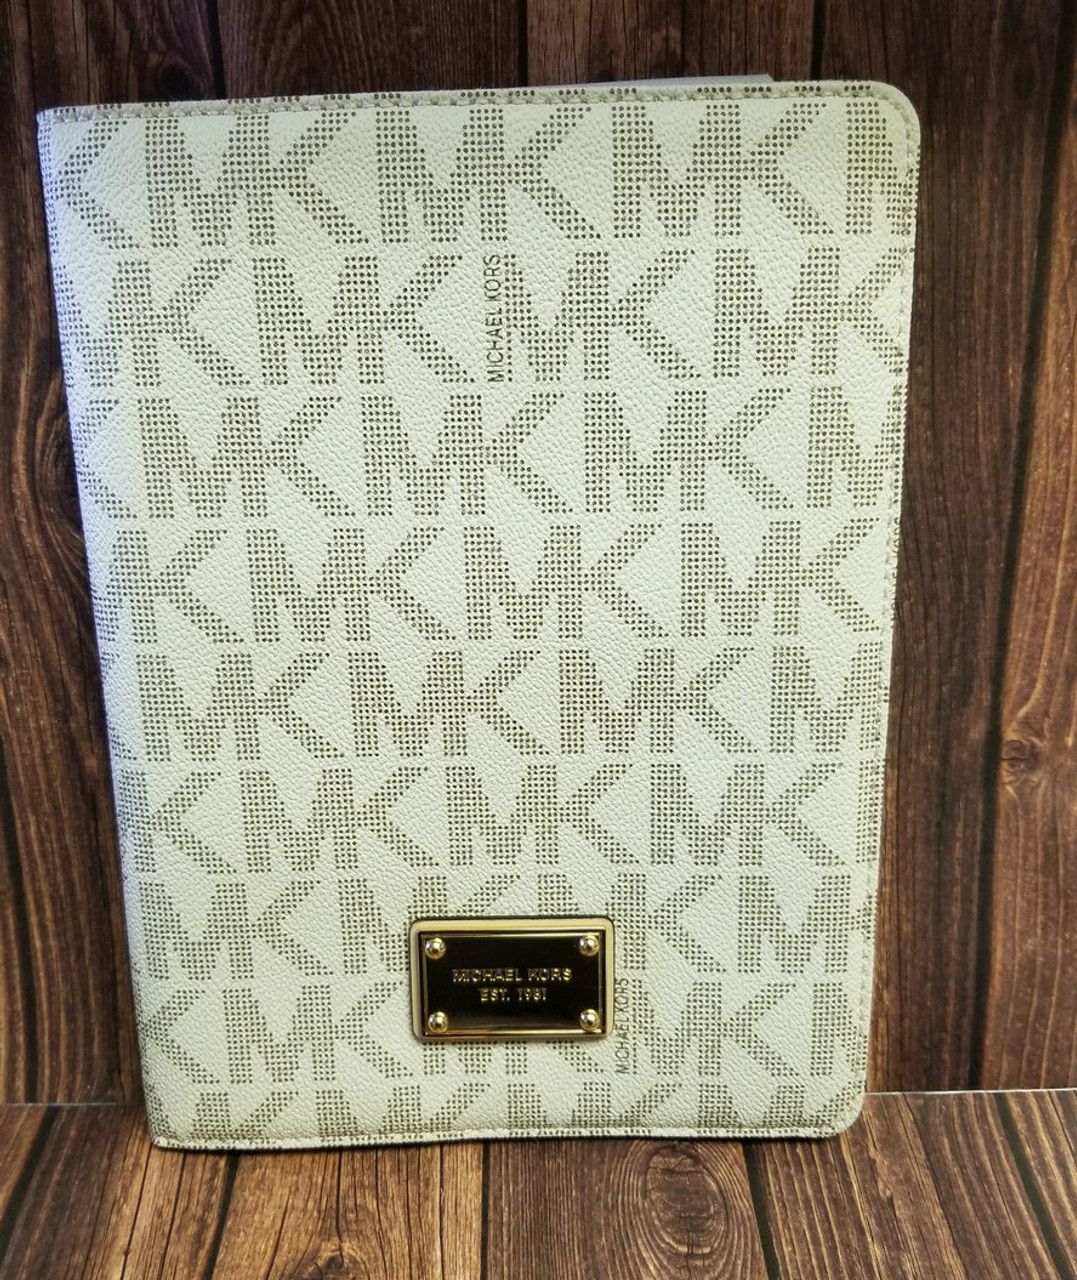 Michael Kors - Logo Vanilla iPAD Case (Large Device) - Annie Rooster's  Sally Ann's Antiques, Collectibles And More...